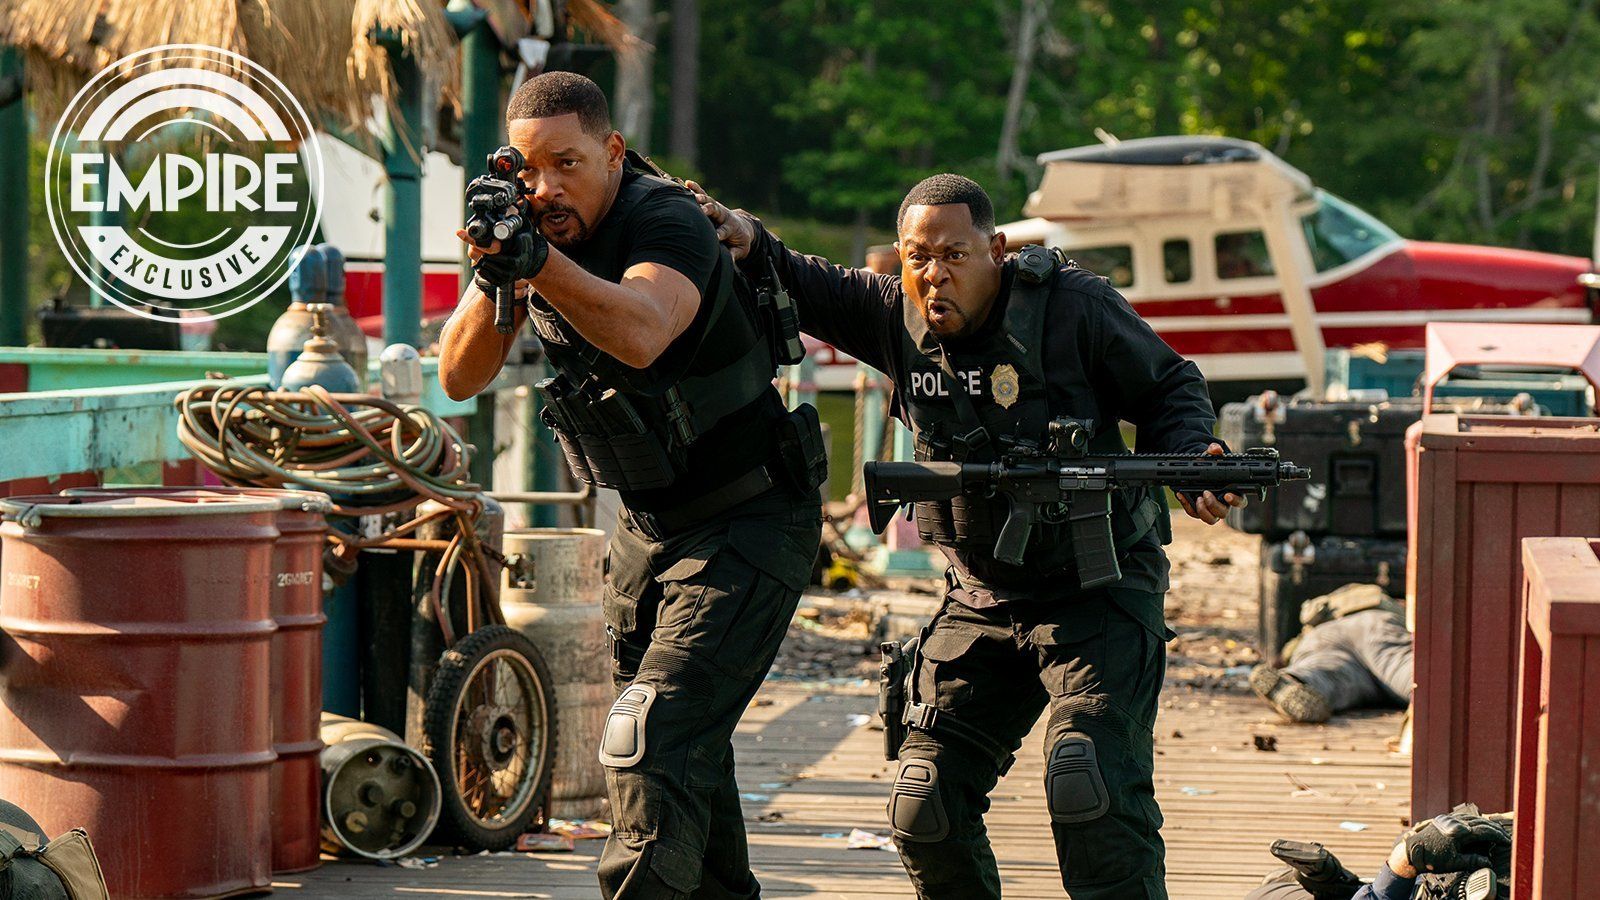 Martin Lawrence with his hand on Will Smith's shoulder as the two hold guns and head into battle